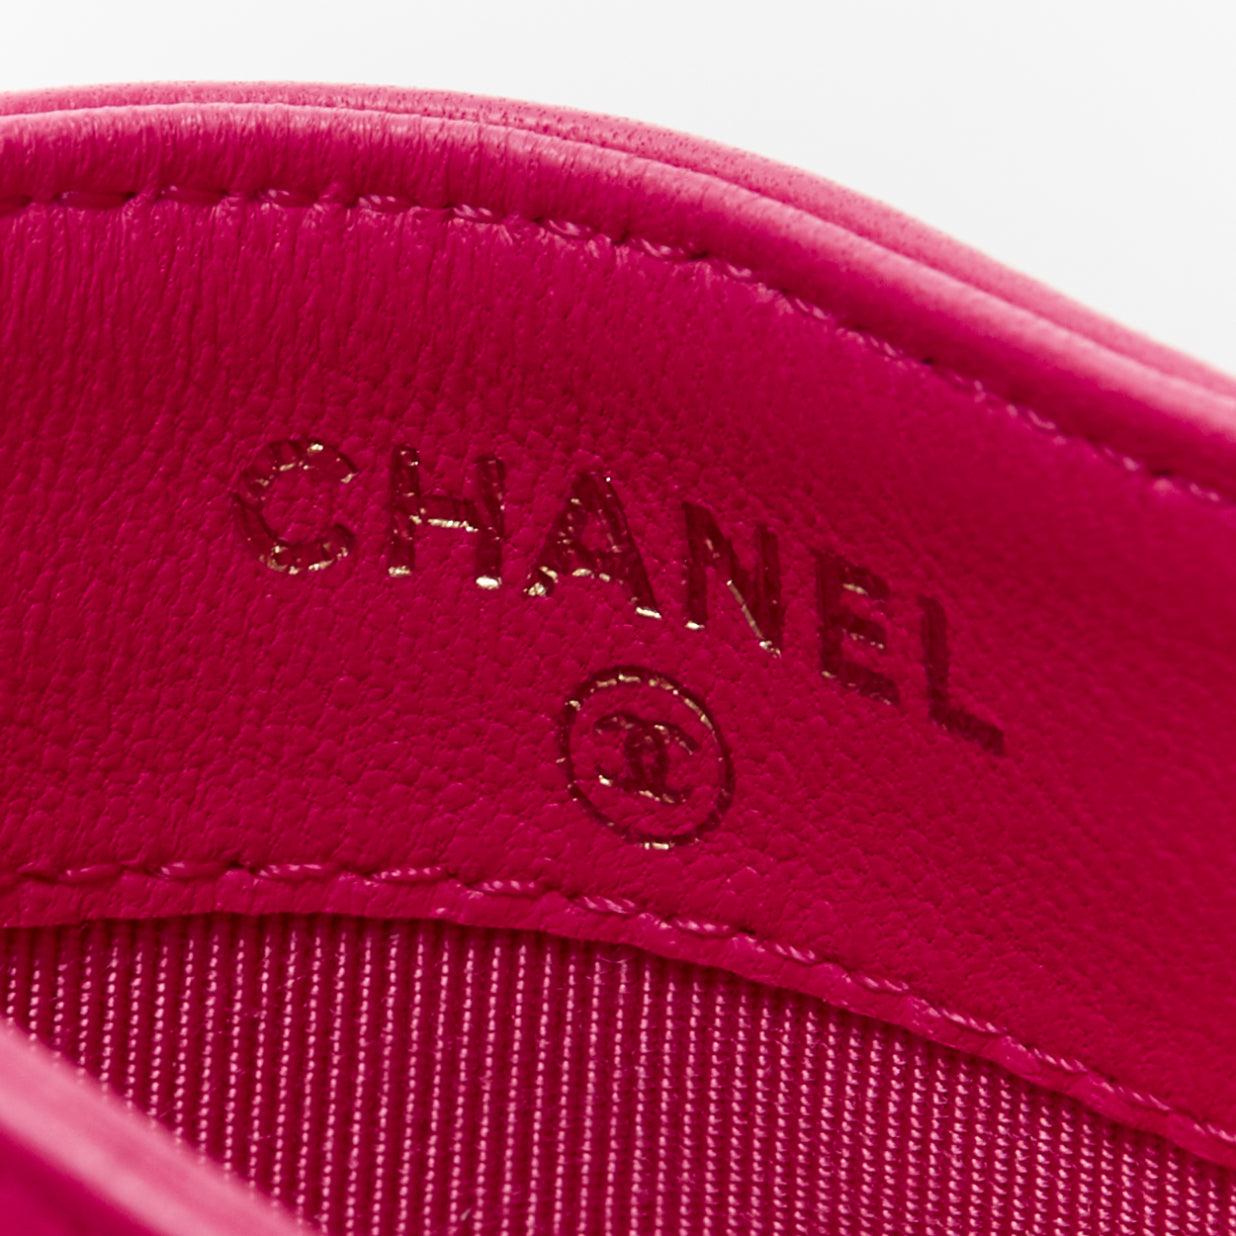 CHANEL bright pink smooth leather CC logo quilted cardholder For Sale 3